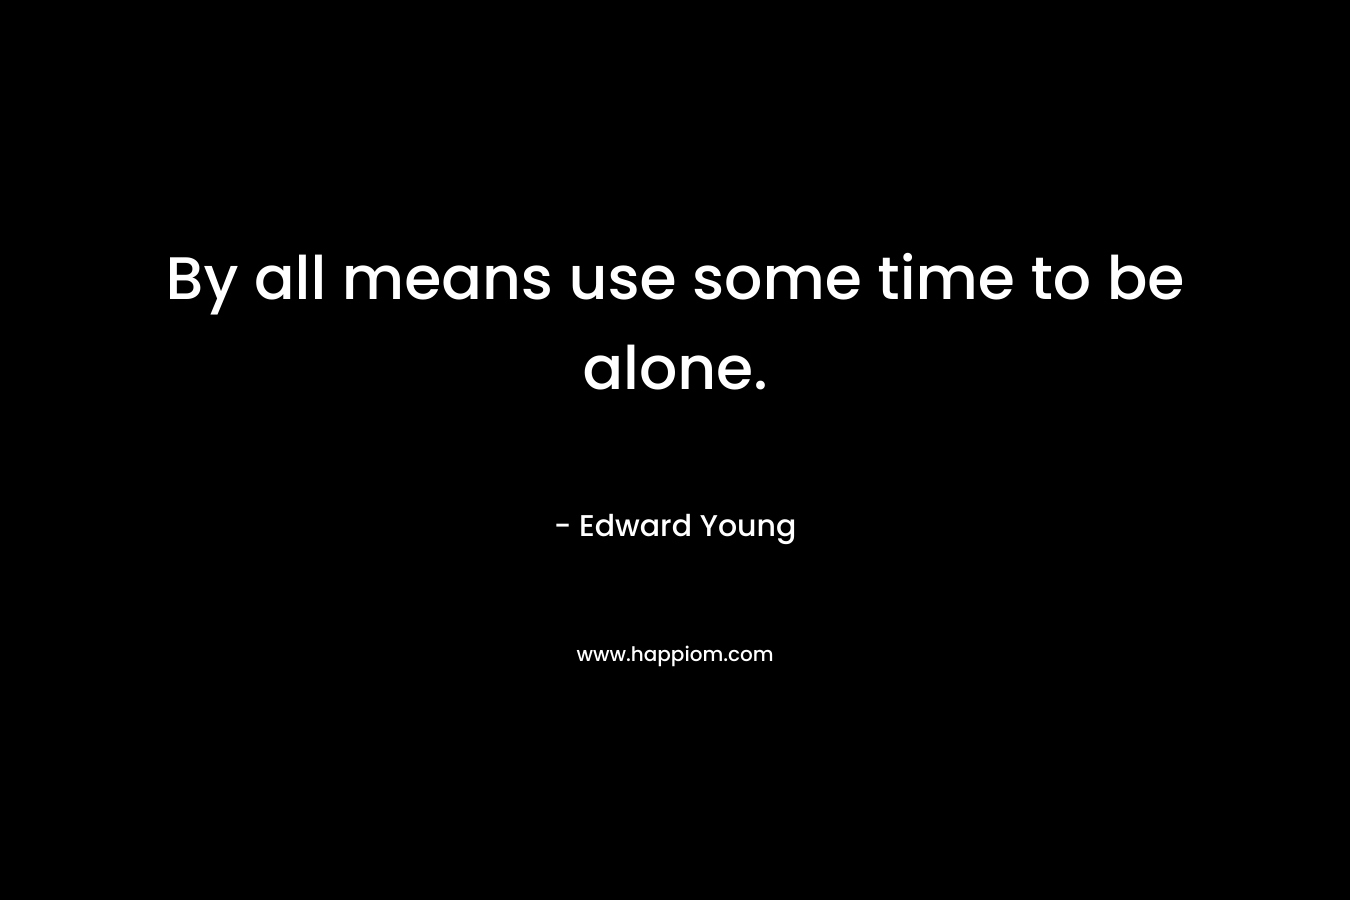 By all means use some time to be alone. – Edward Young